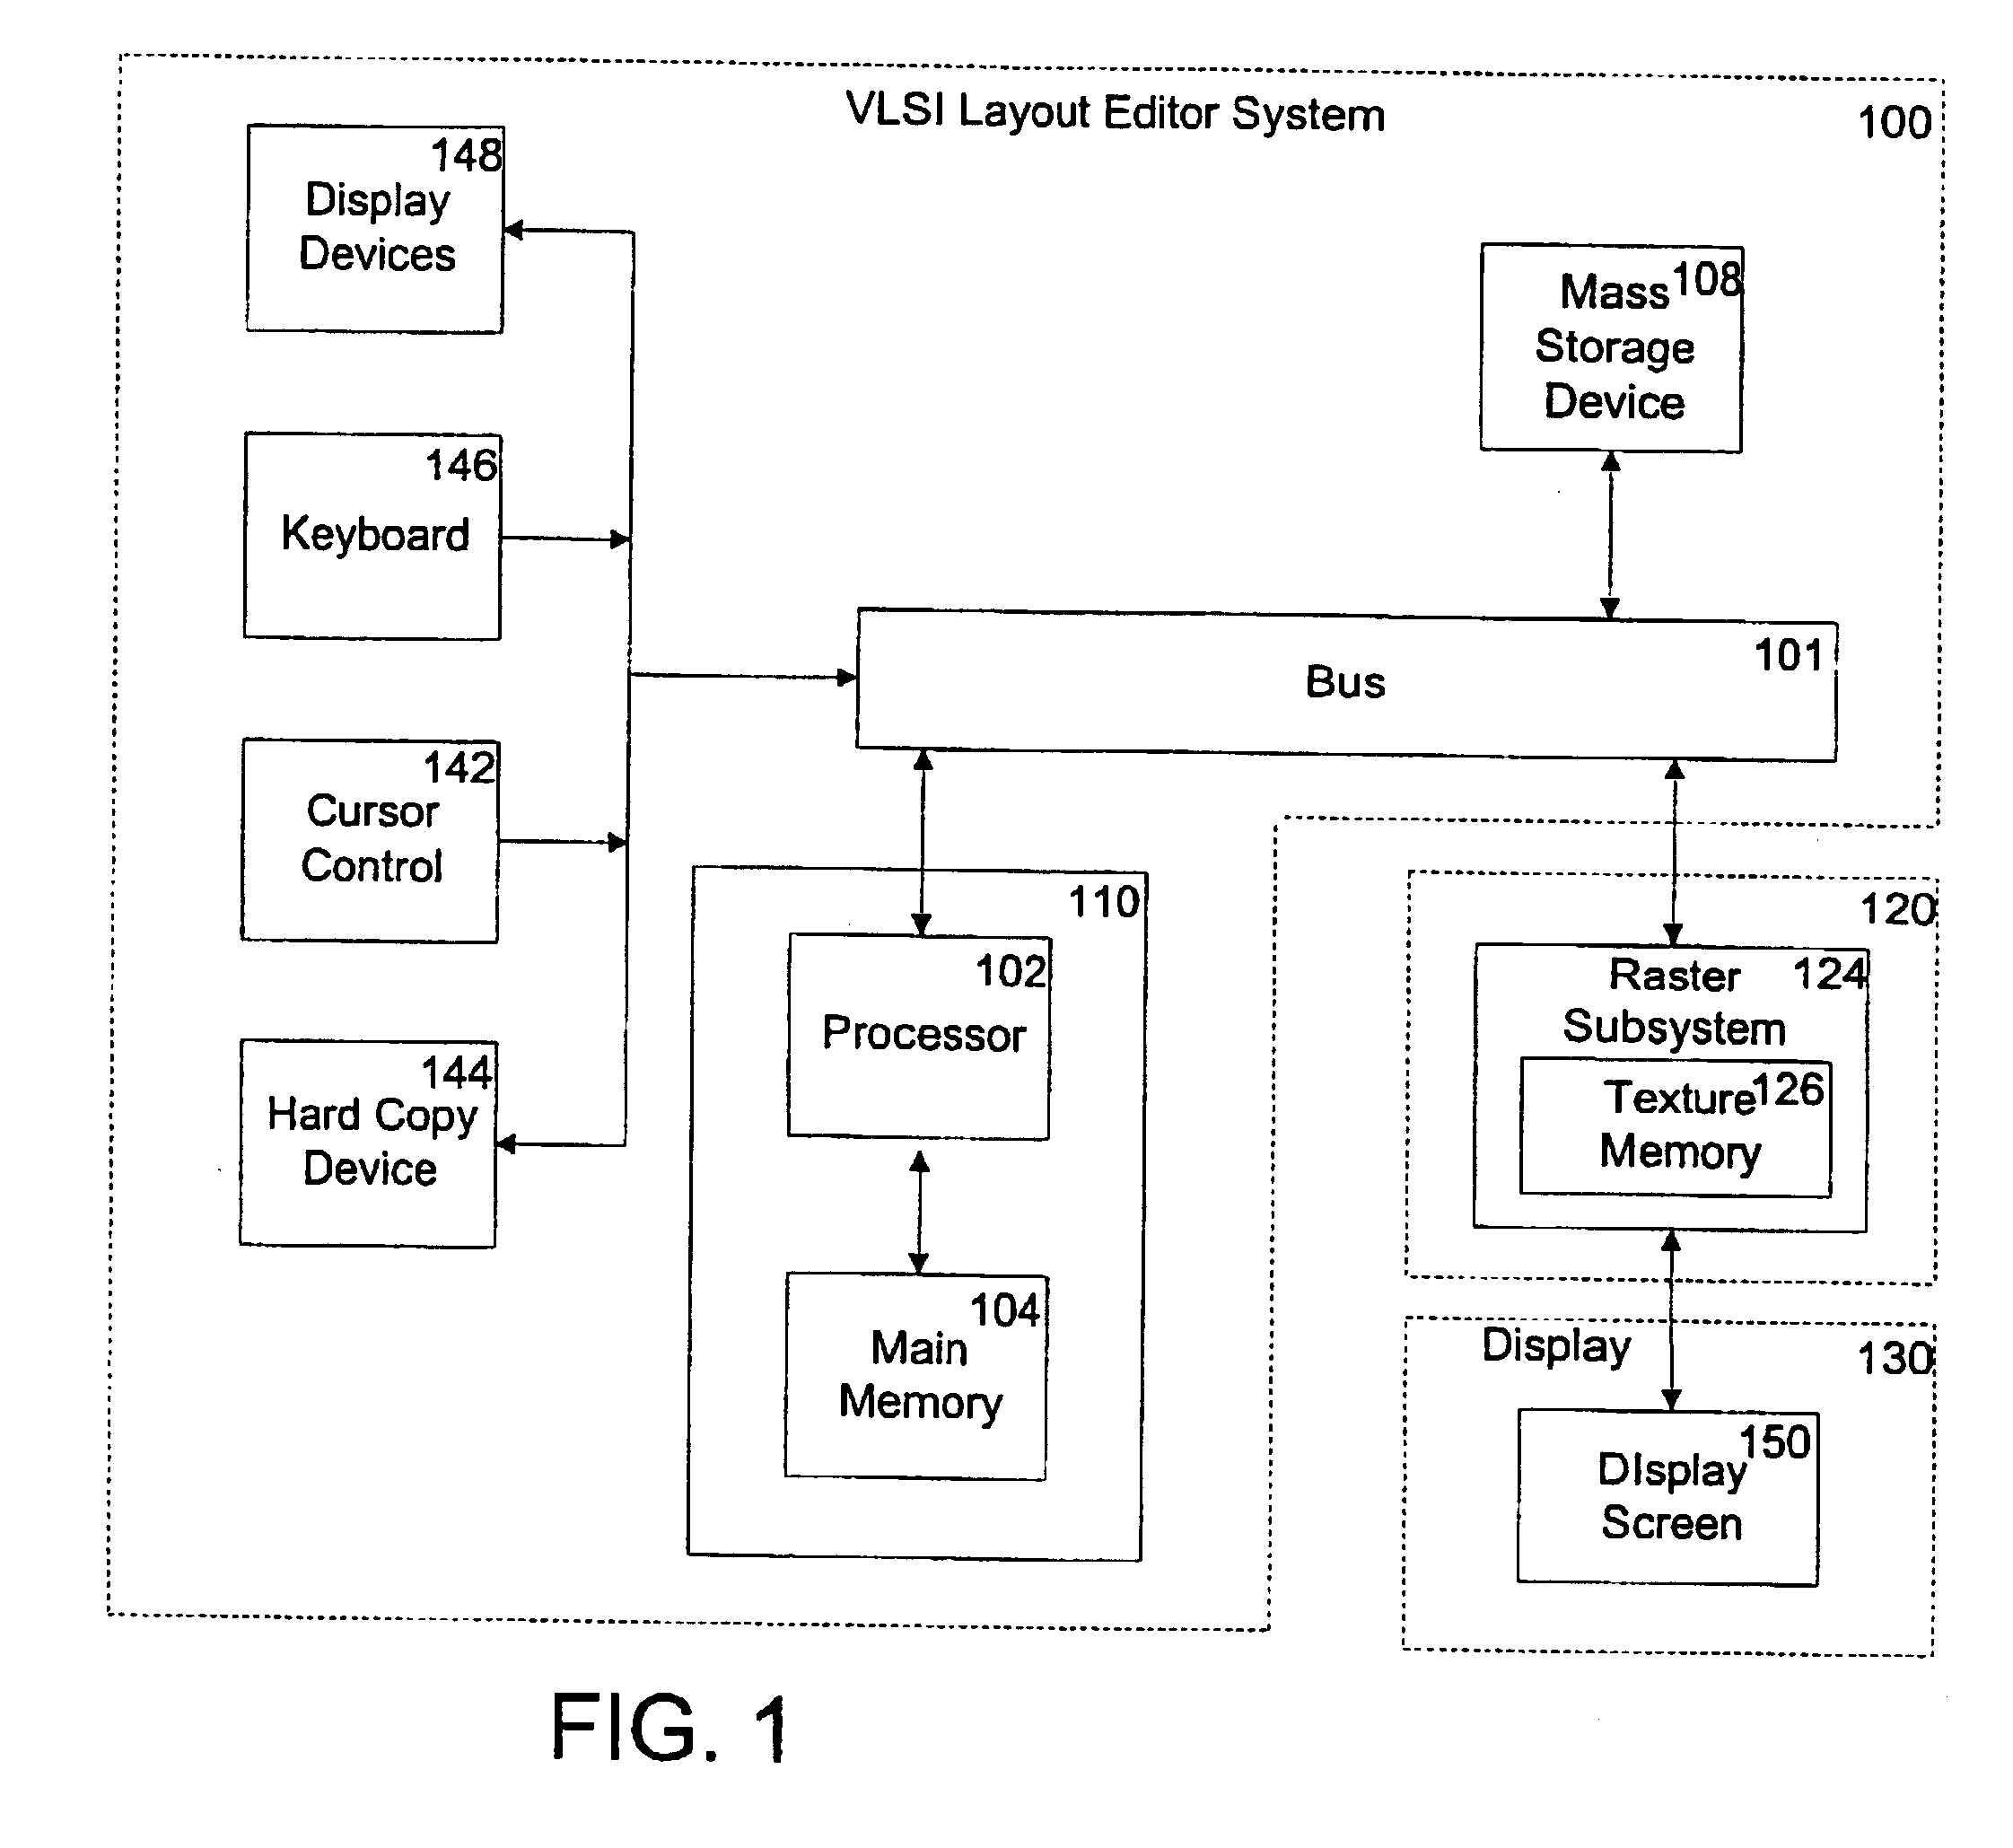 Method and system for displaying VLSI layout data